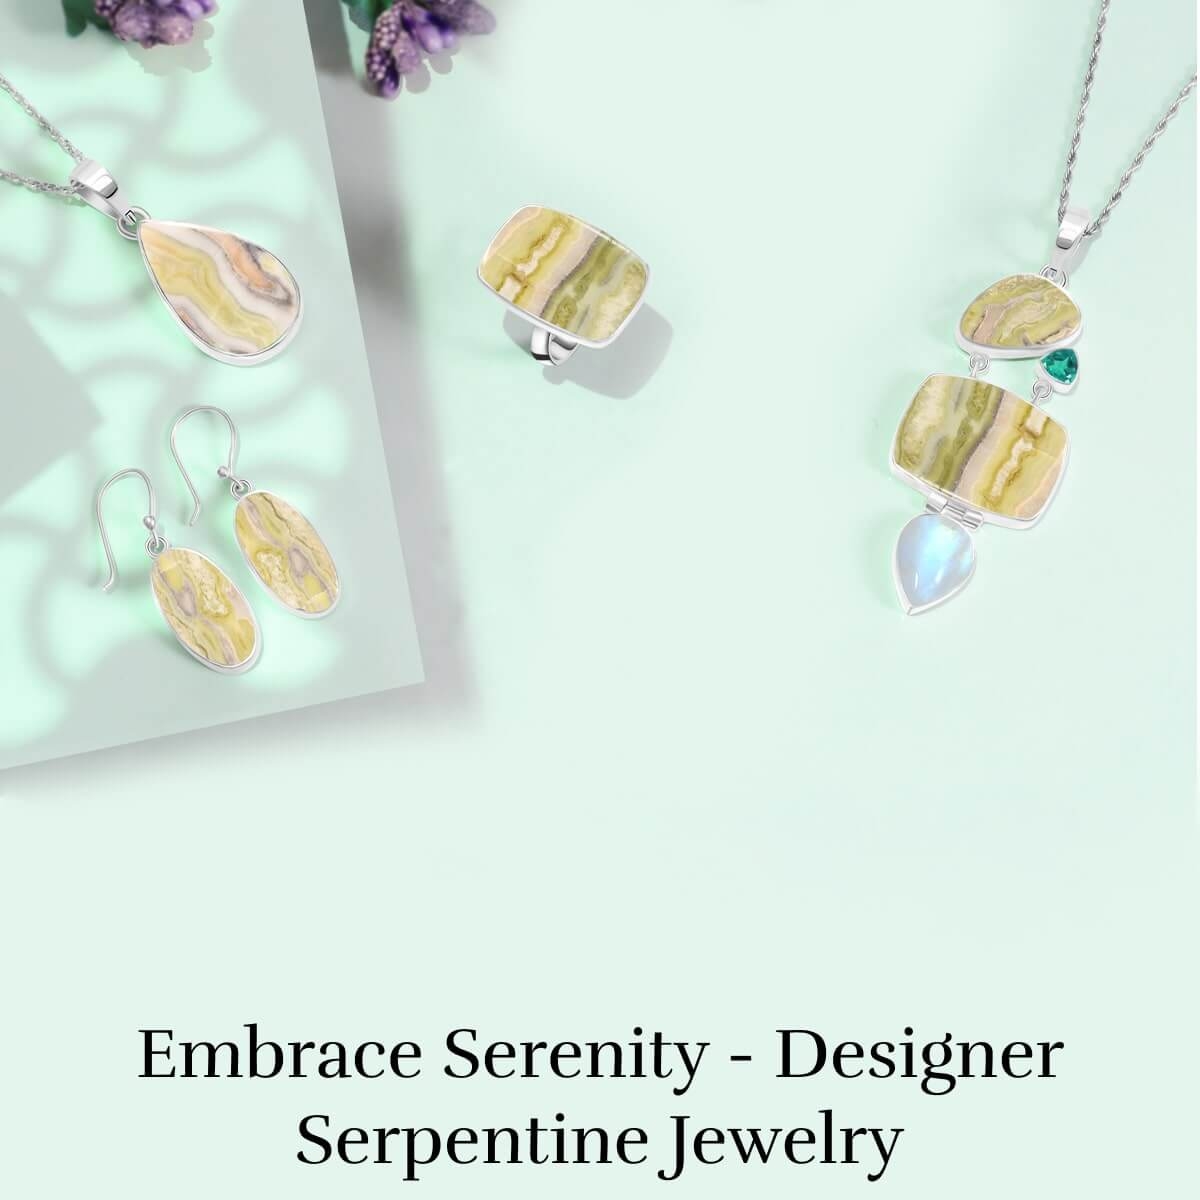 Relax Your Mind With Serpentine Designer Jewelry